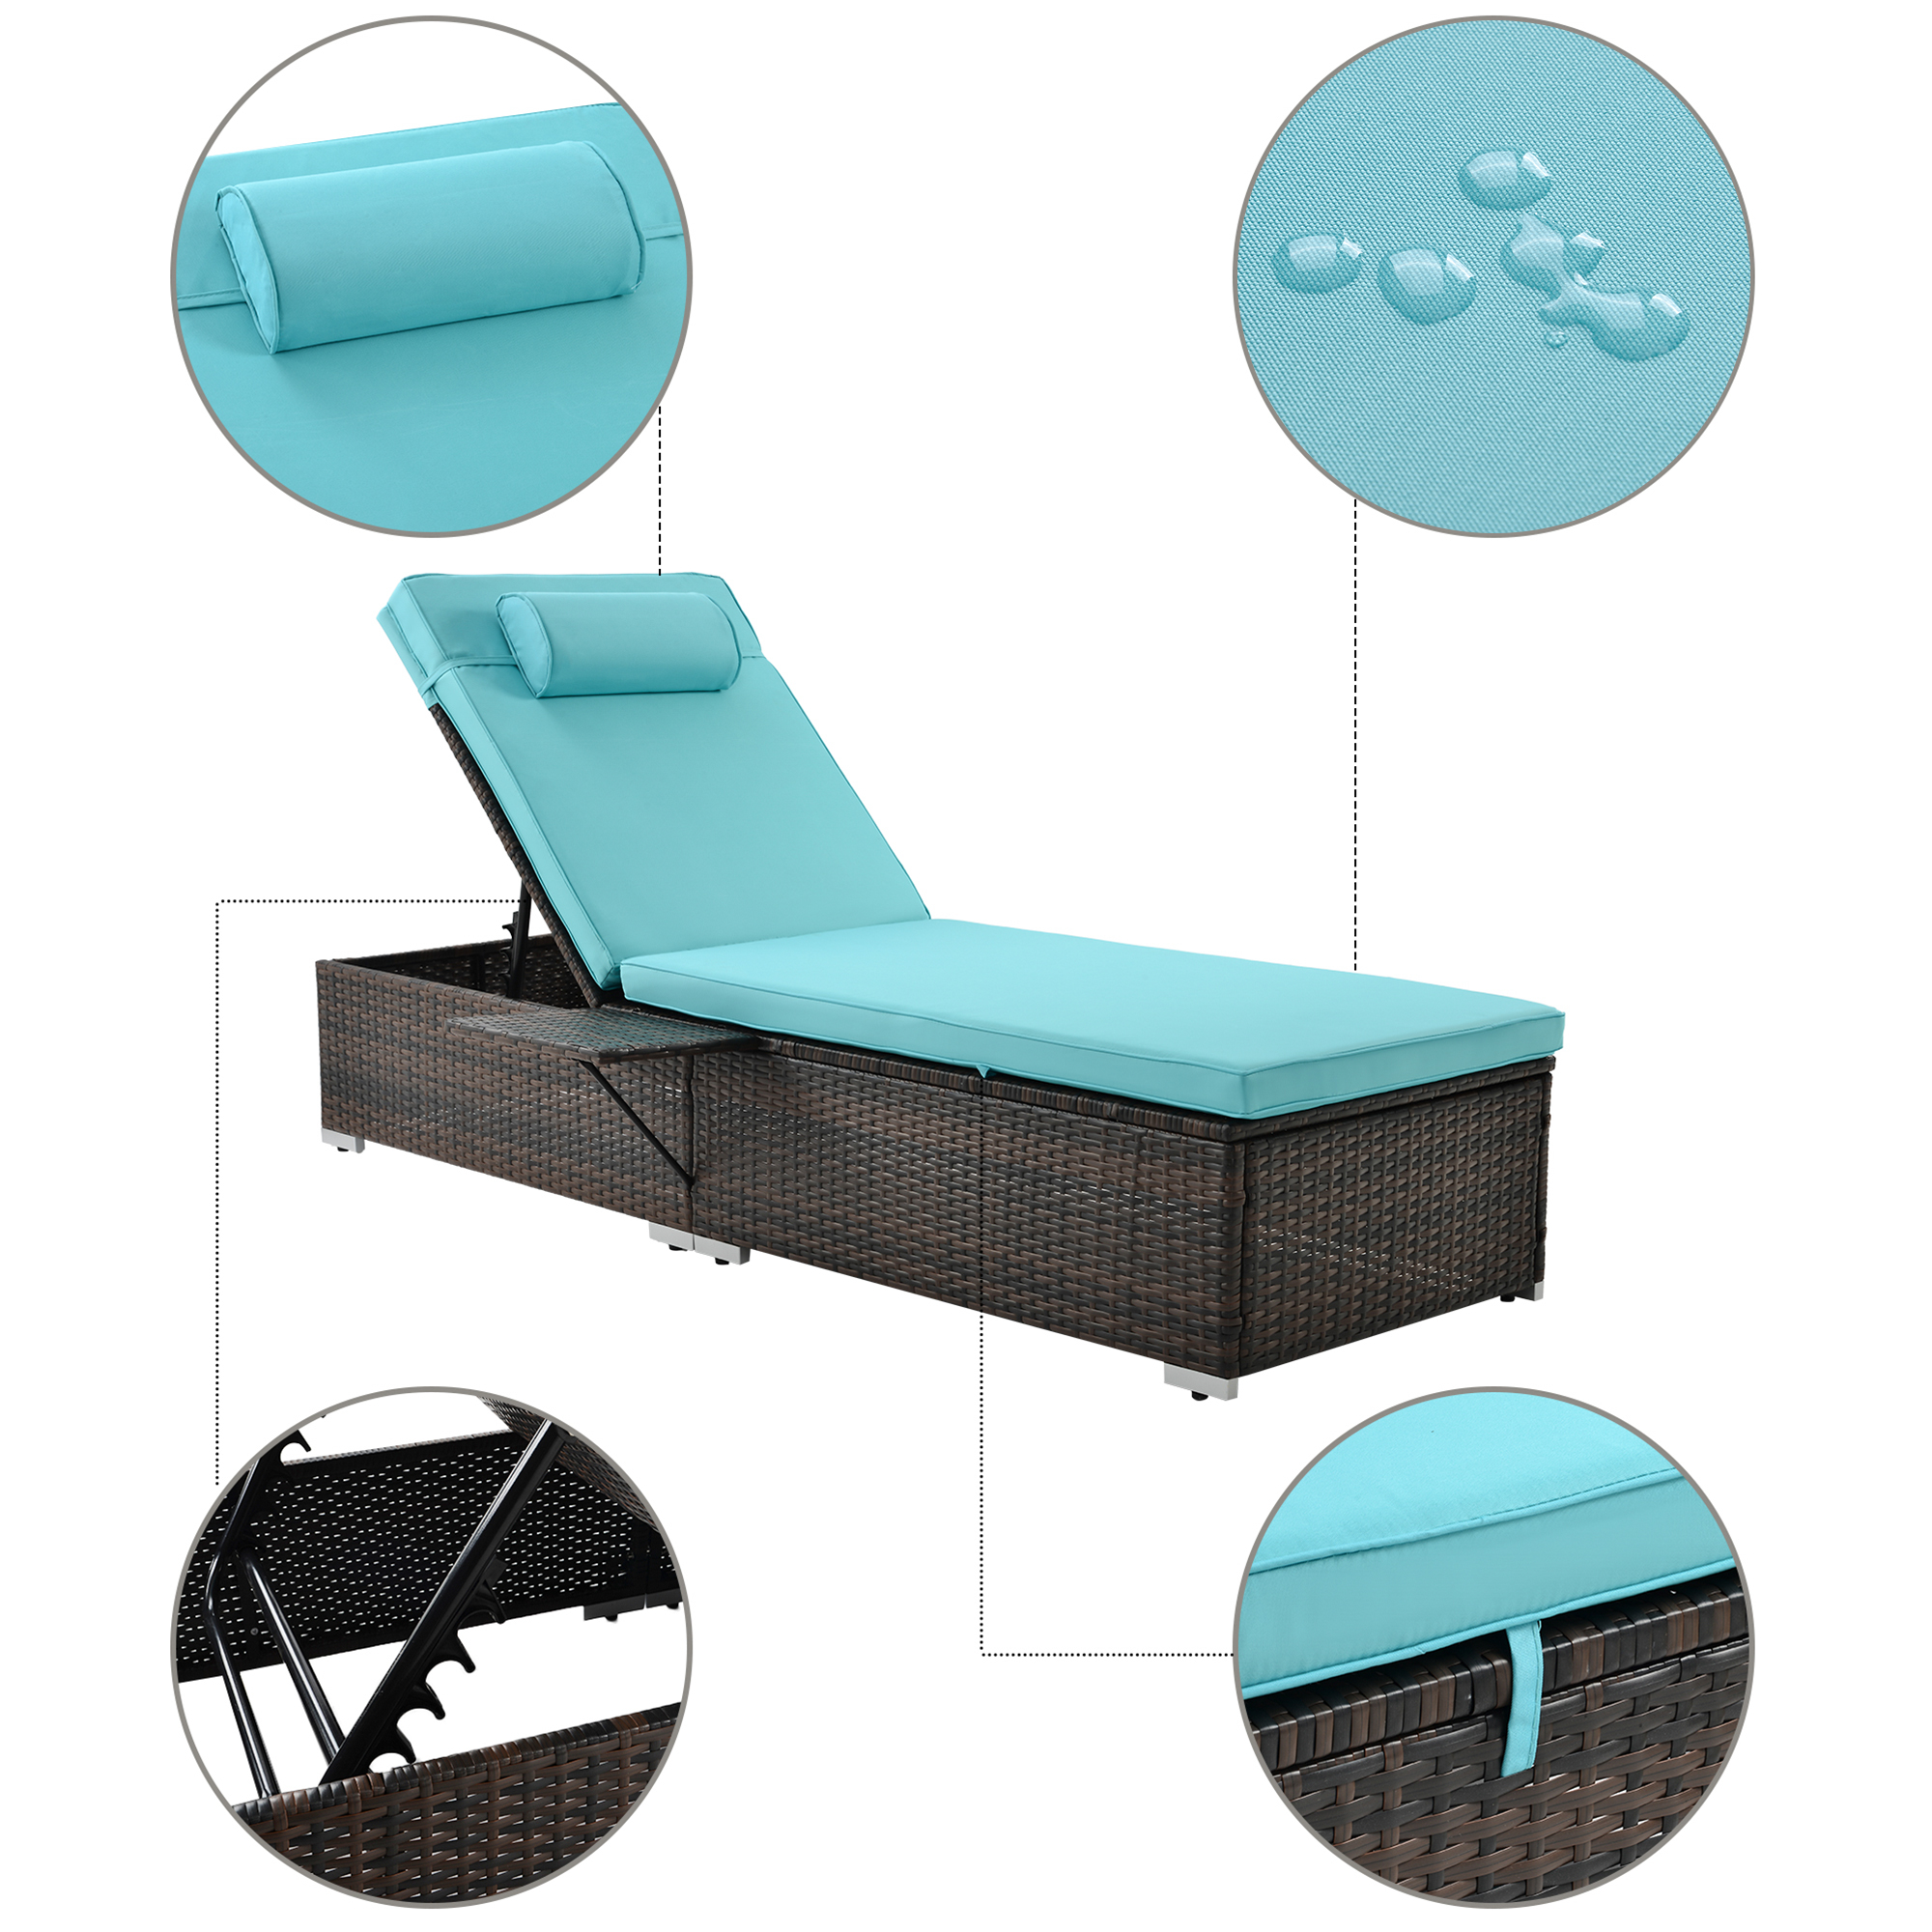 Patio Chaise Lounge 2 Sets with 5 Backrest Angles, Outdoor Single Adjustable Patio Wicker Lounge Chair with side Storage Shelf for Poolside Backyard Deck Porch Garden - image 3 of 7